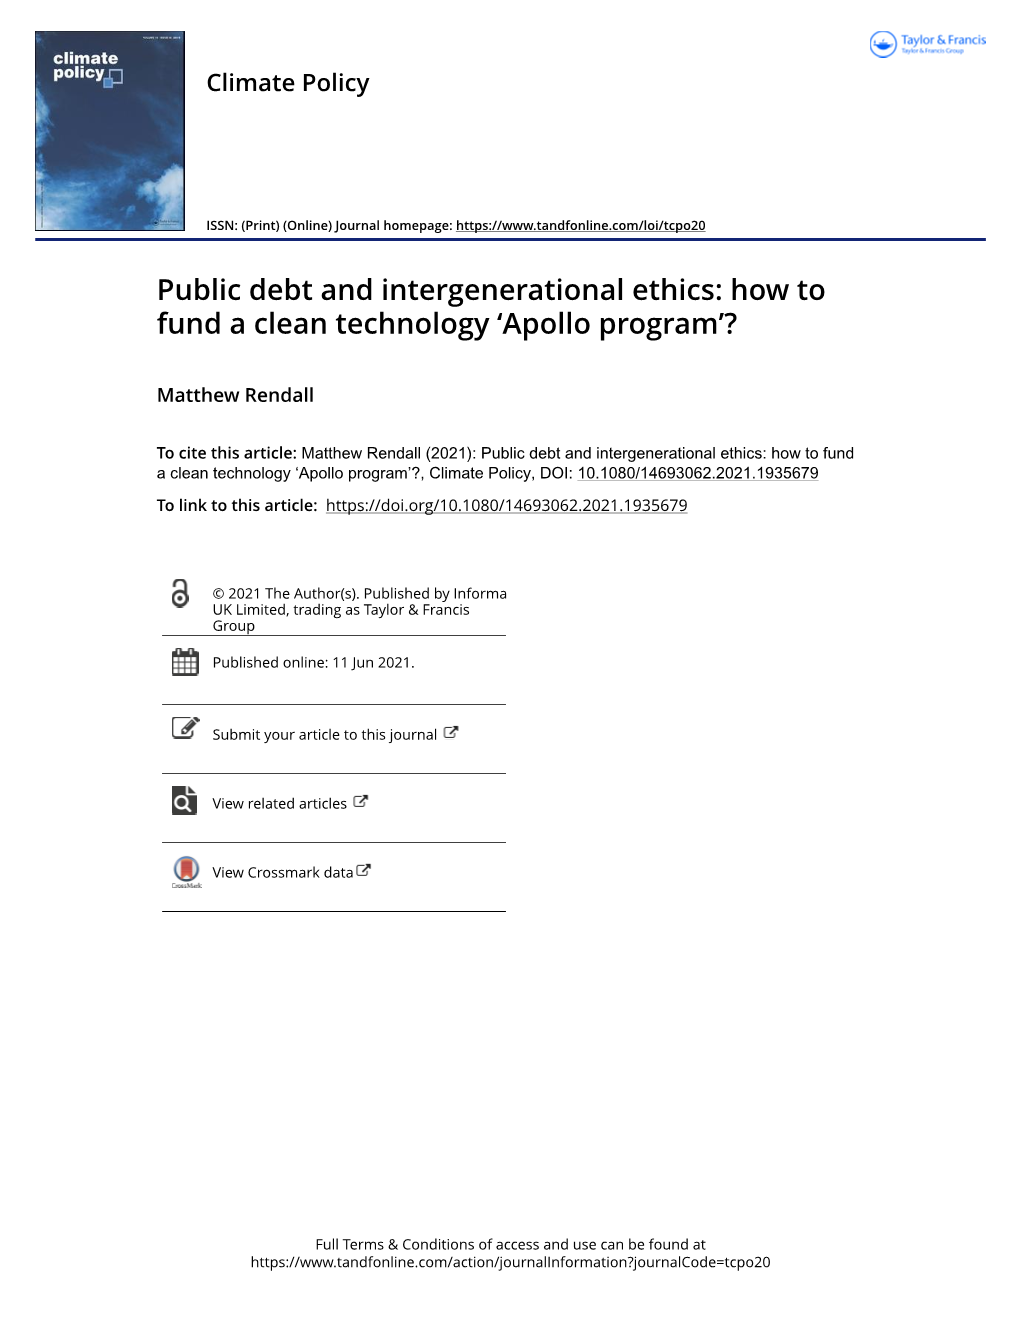 Public Debt and Intergenerational Ethics: How to Fund a Clean Technology ‘Apollo Program’?